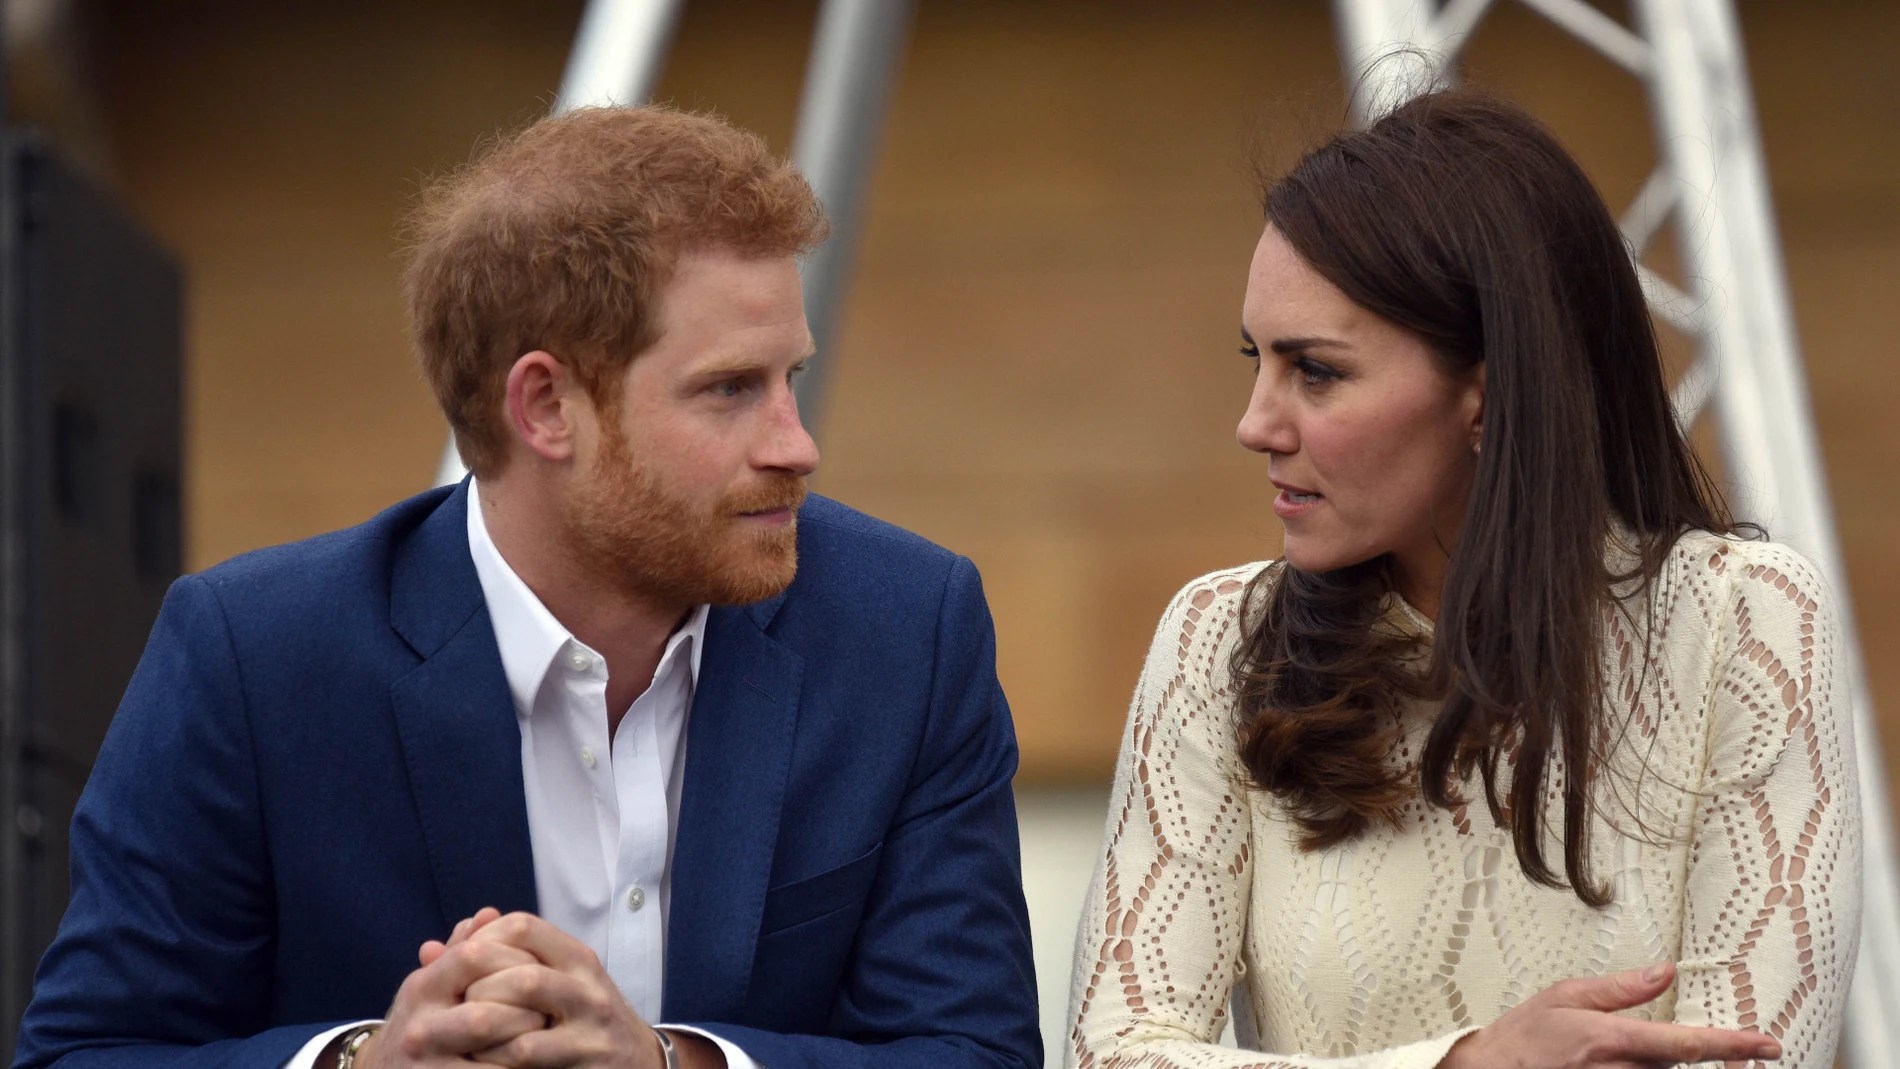 The British press revealed the only reason behind Kate Middleton’s return to Prince Harry